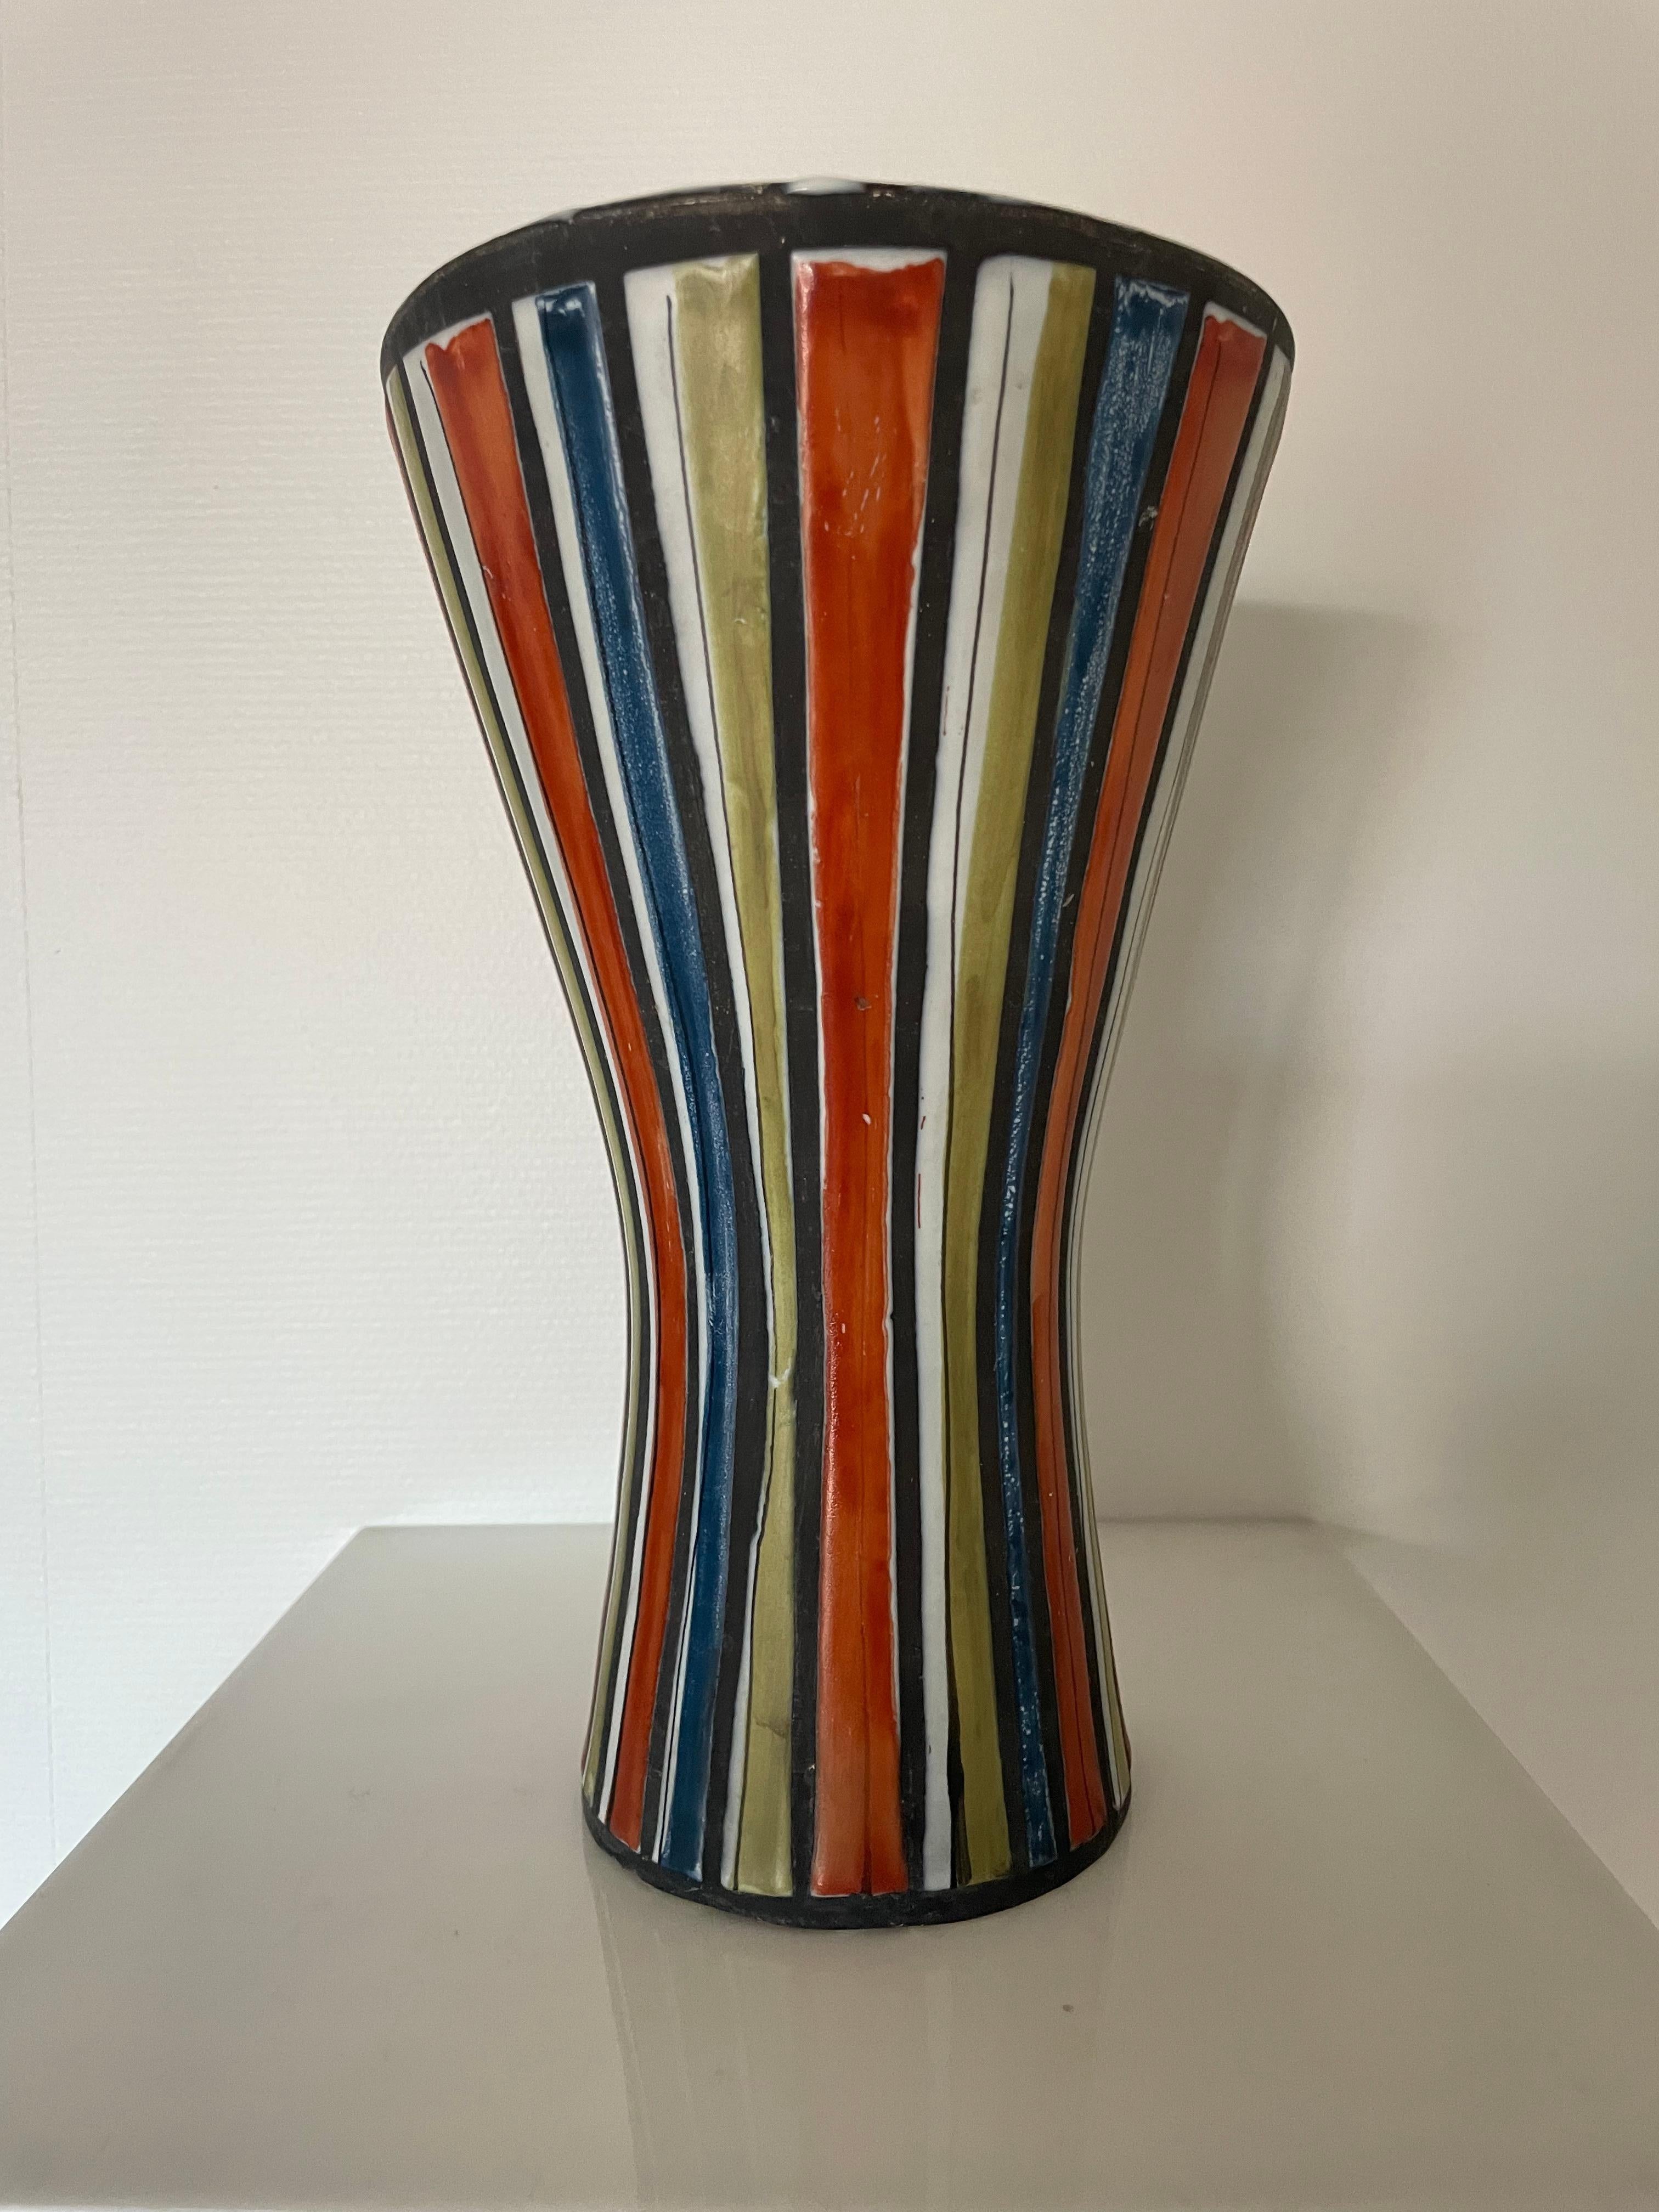 Roger Capron was a student of Applied Arts in Paris from 1938 to 1943 before teaching drawing there from 1945 In 1946 he moved to Vallauris where he created a ceramics workshop
 Callis In doing so he joined forces with Robert Picault and then Jean